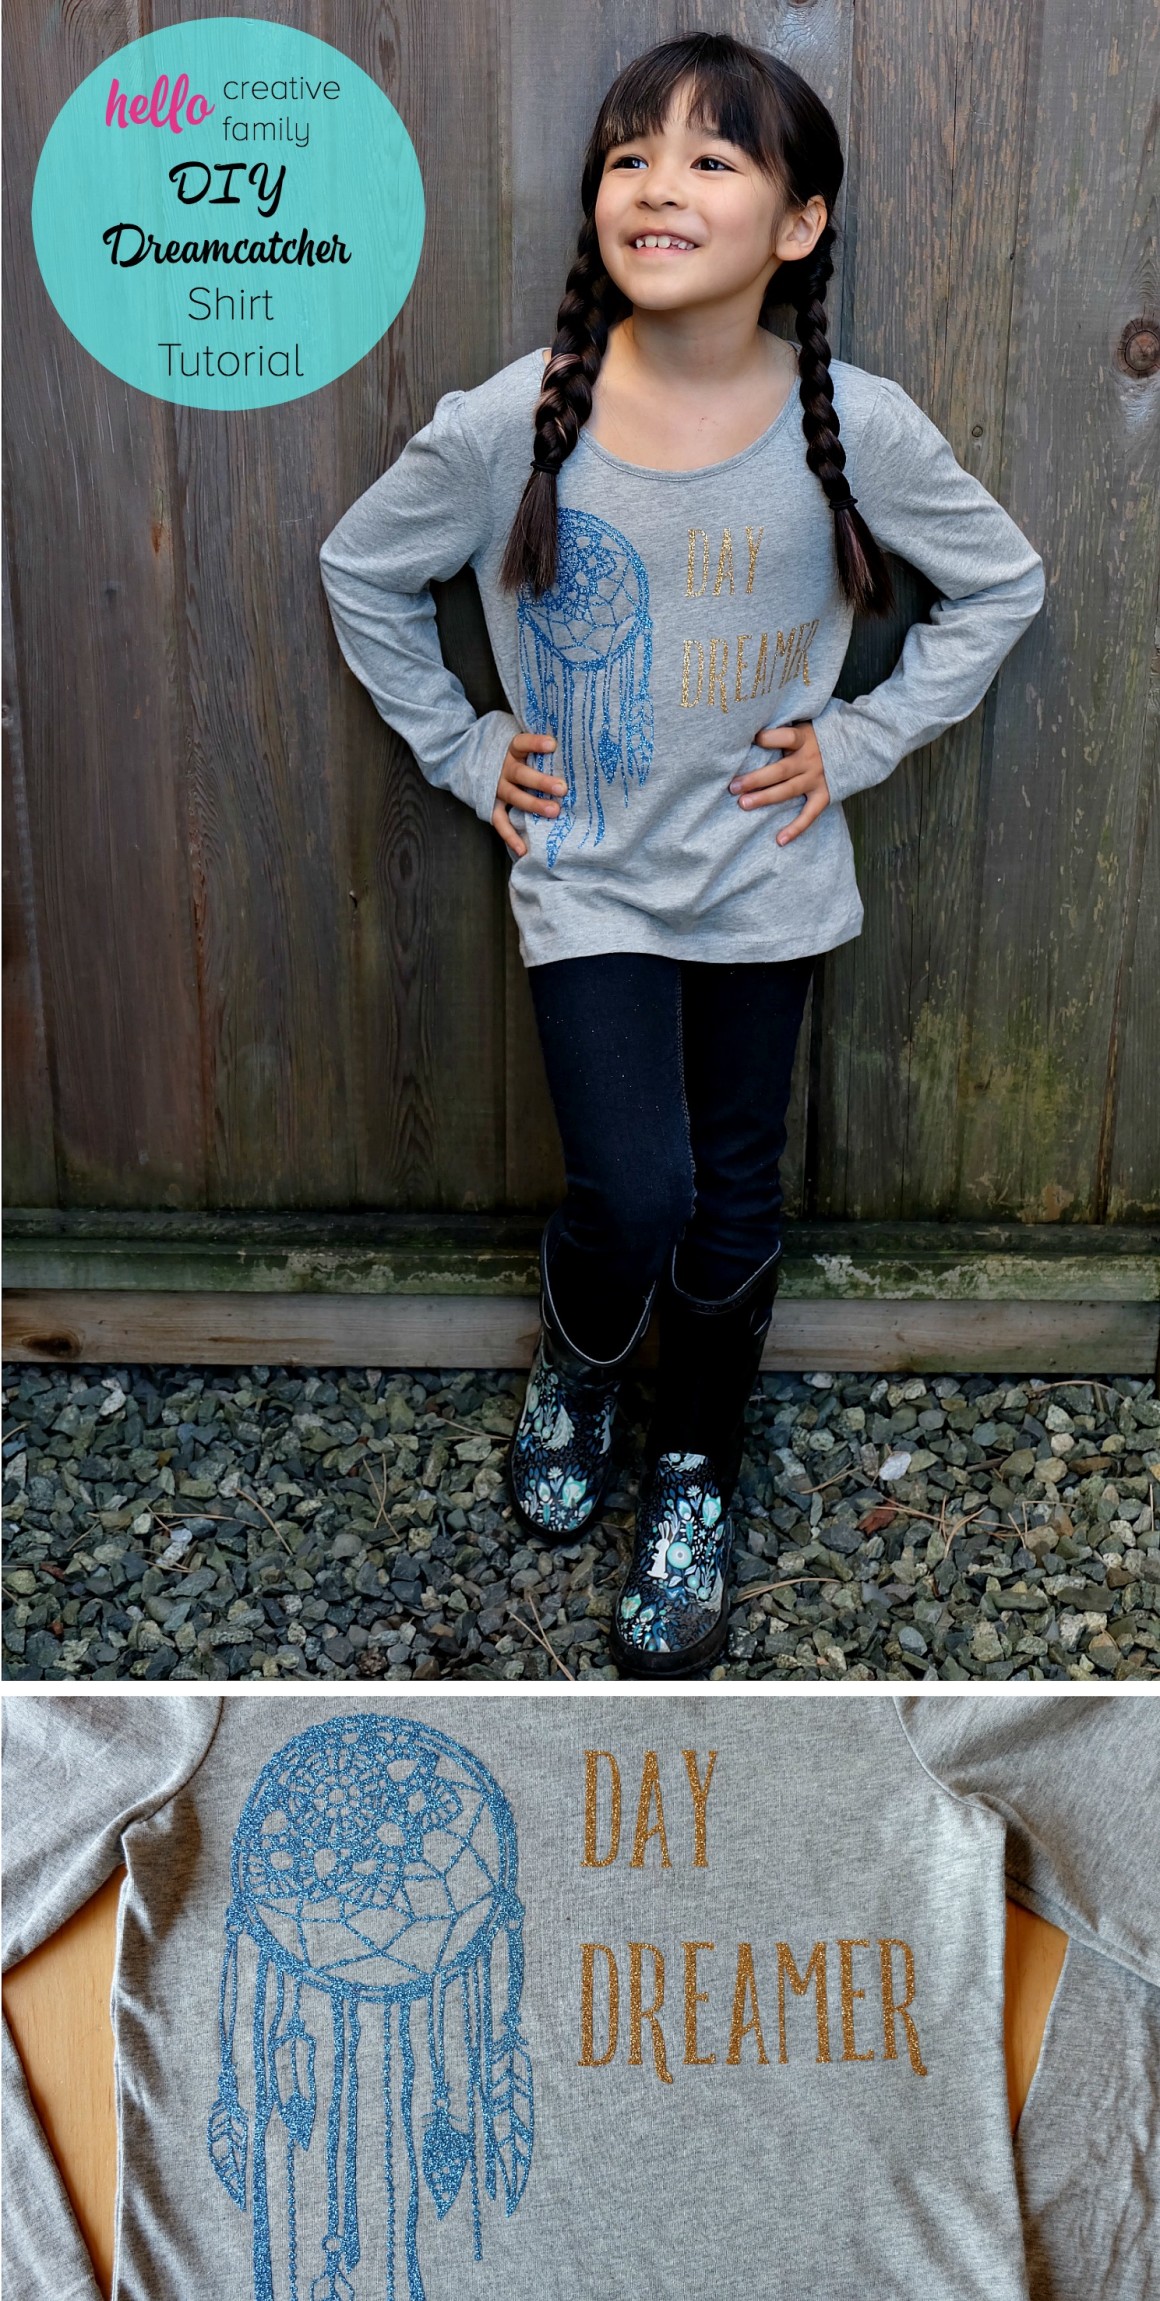 The perfect shirt for the dreamer in your life! This DIY Dreamcatcher shirt can be made in minutes using the Cricut Explore. The project says Day Dreamer and would be lovely for women's or children's clothing!